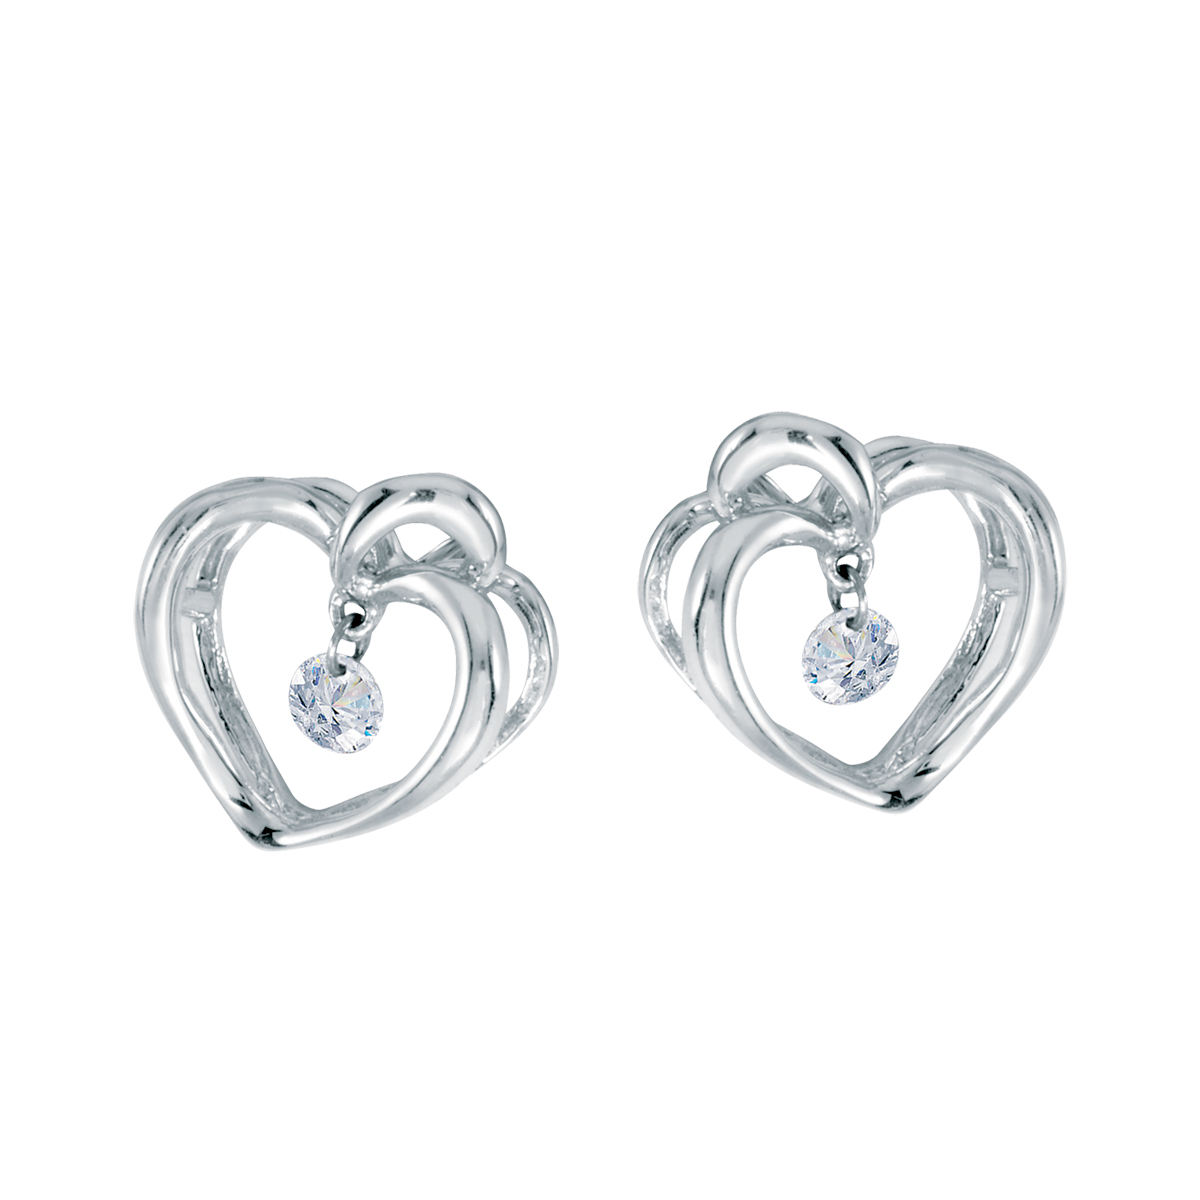 JCX2463: Heart shaped earrings set in 10k with gold with center diamonds that float and move with every heartbeat. Shimmering and brilliant  the perfect gift for someone special.